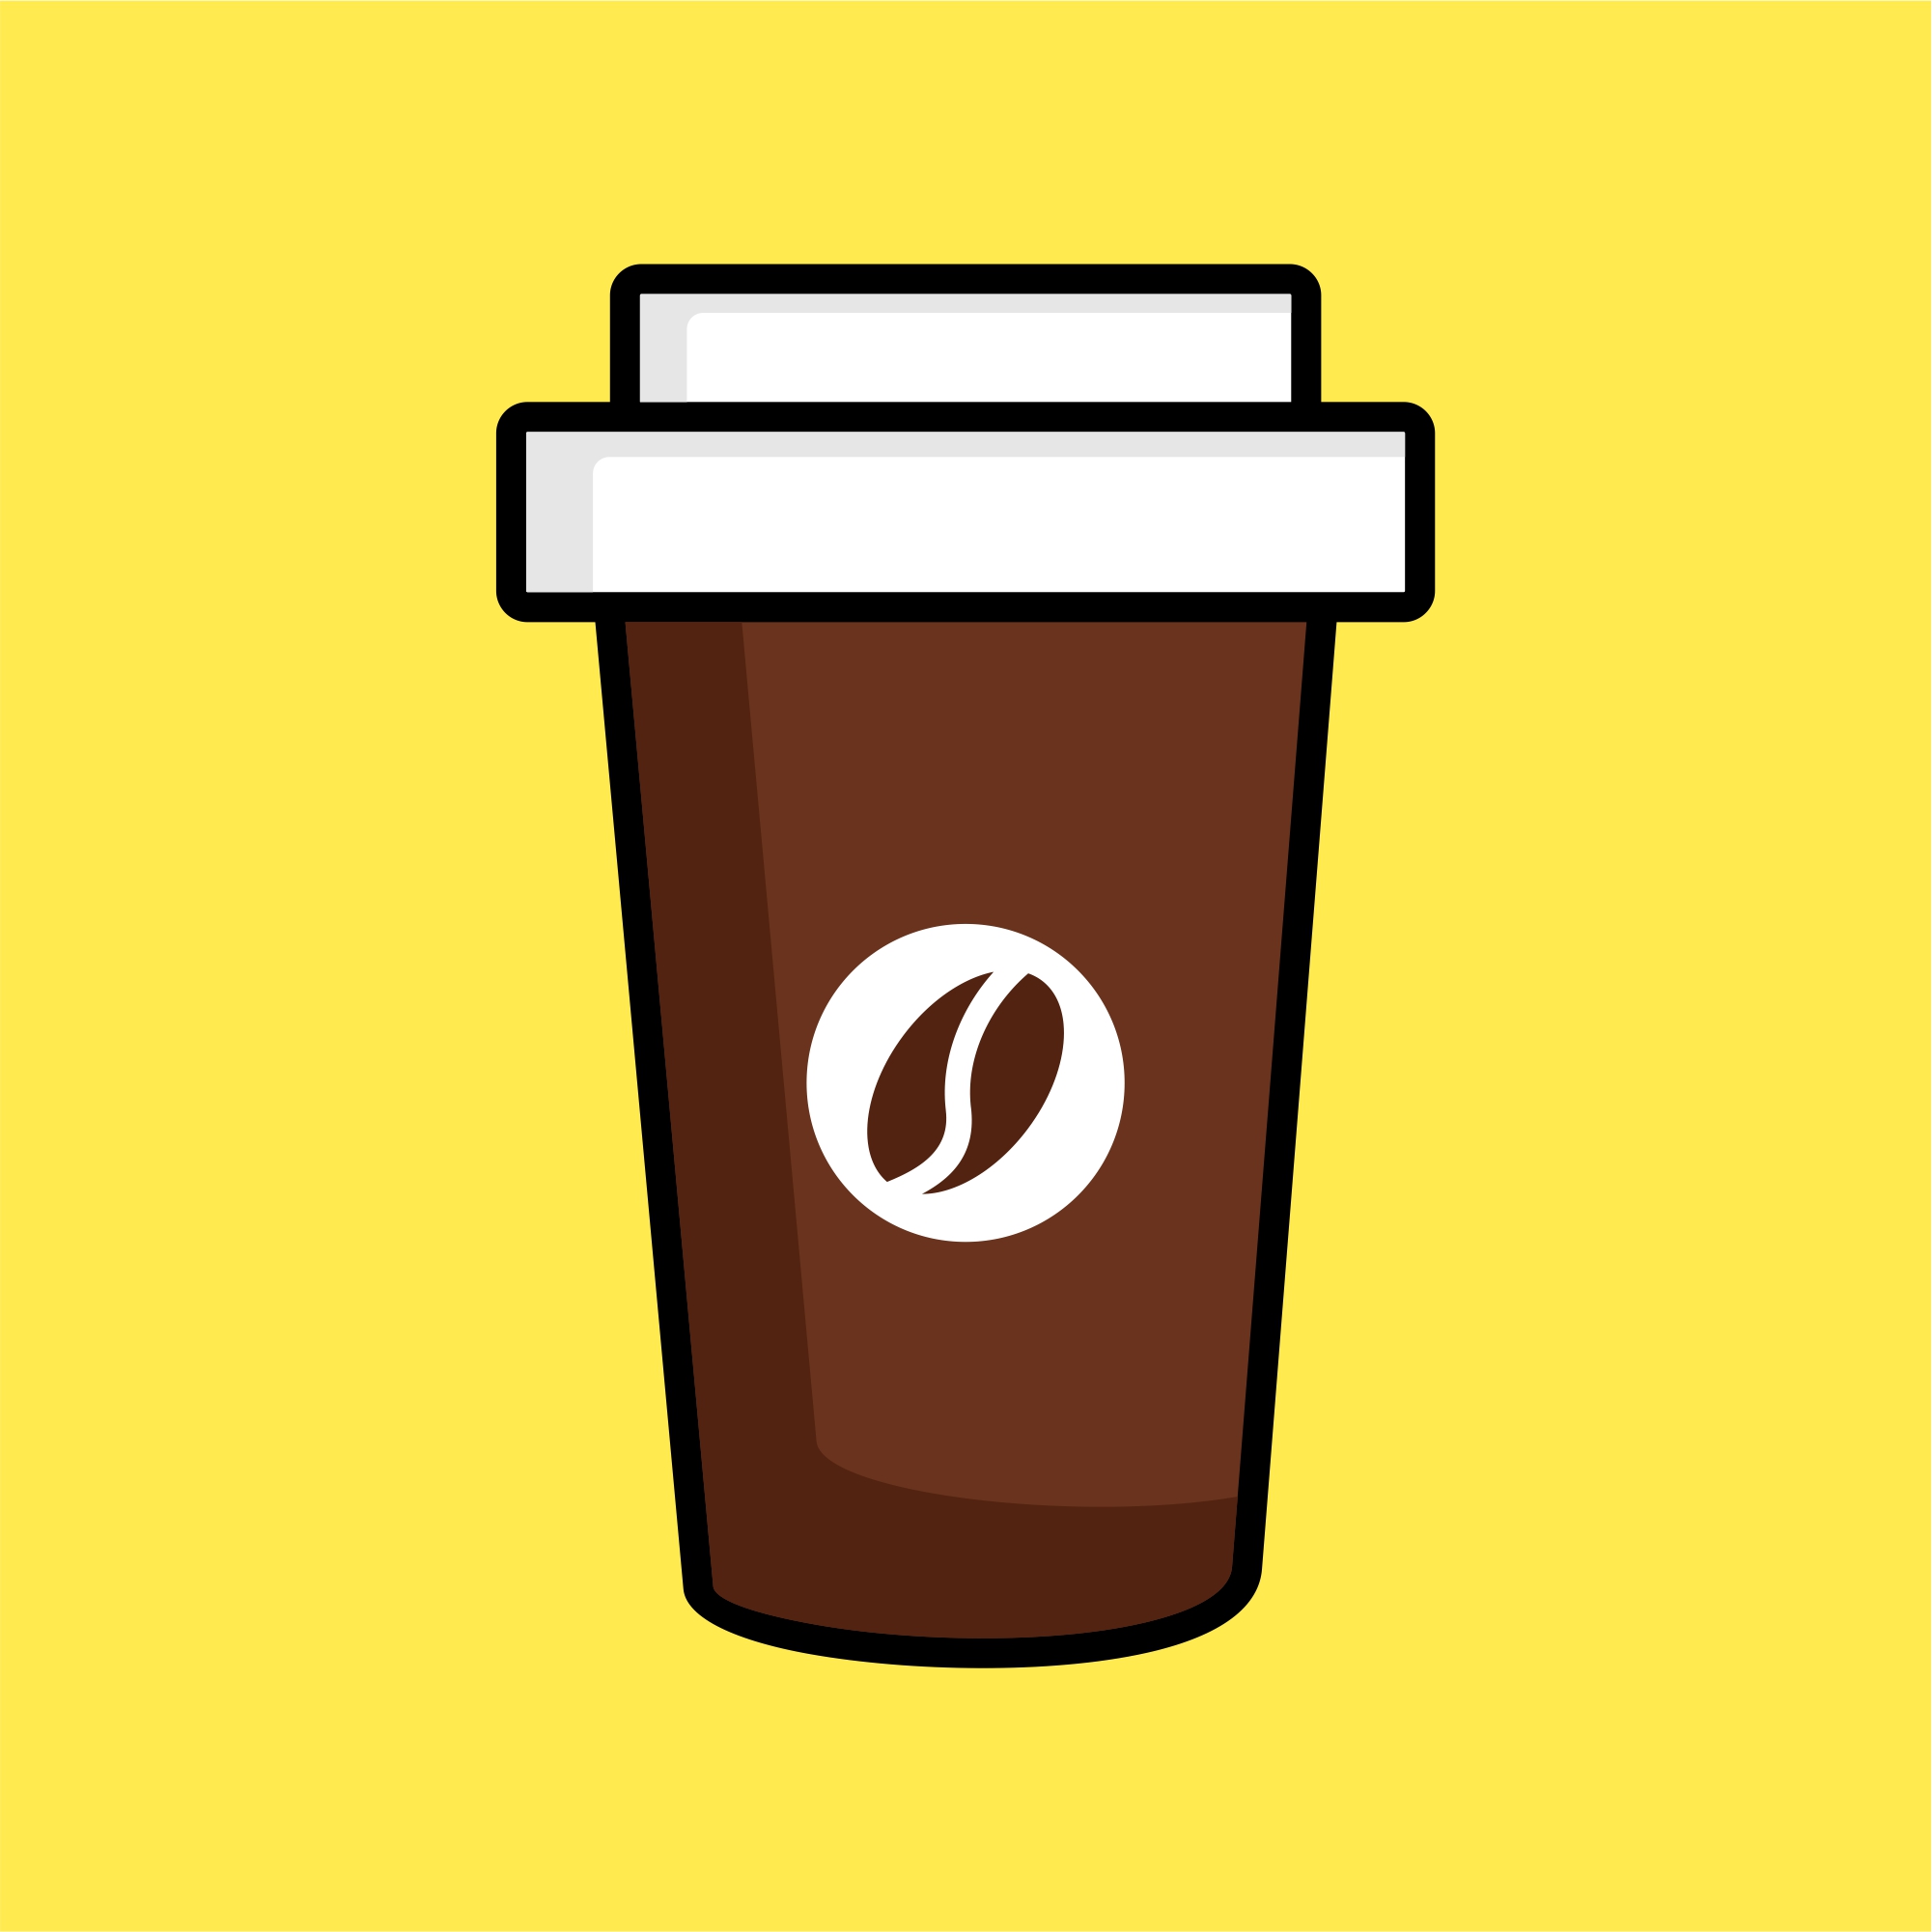 Colorful illustration of cup of coffee with yellow background.